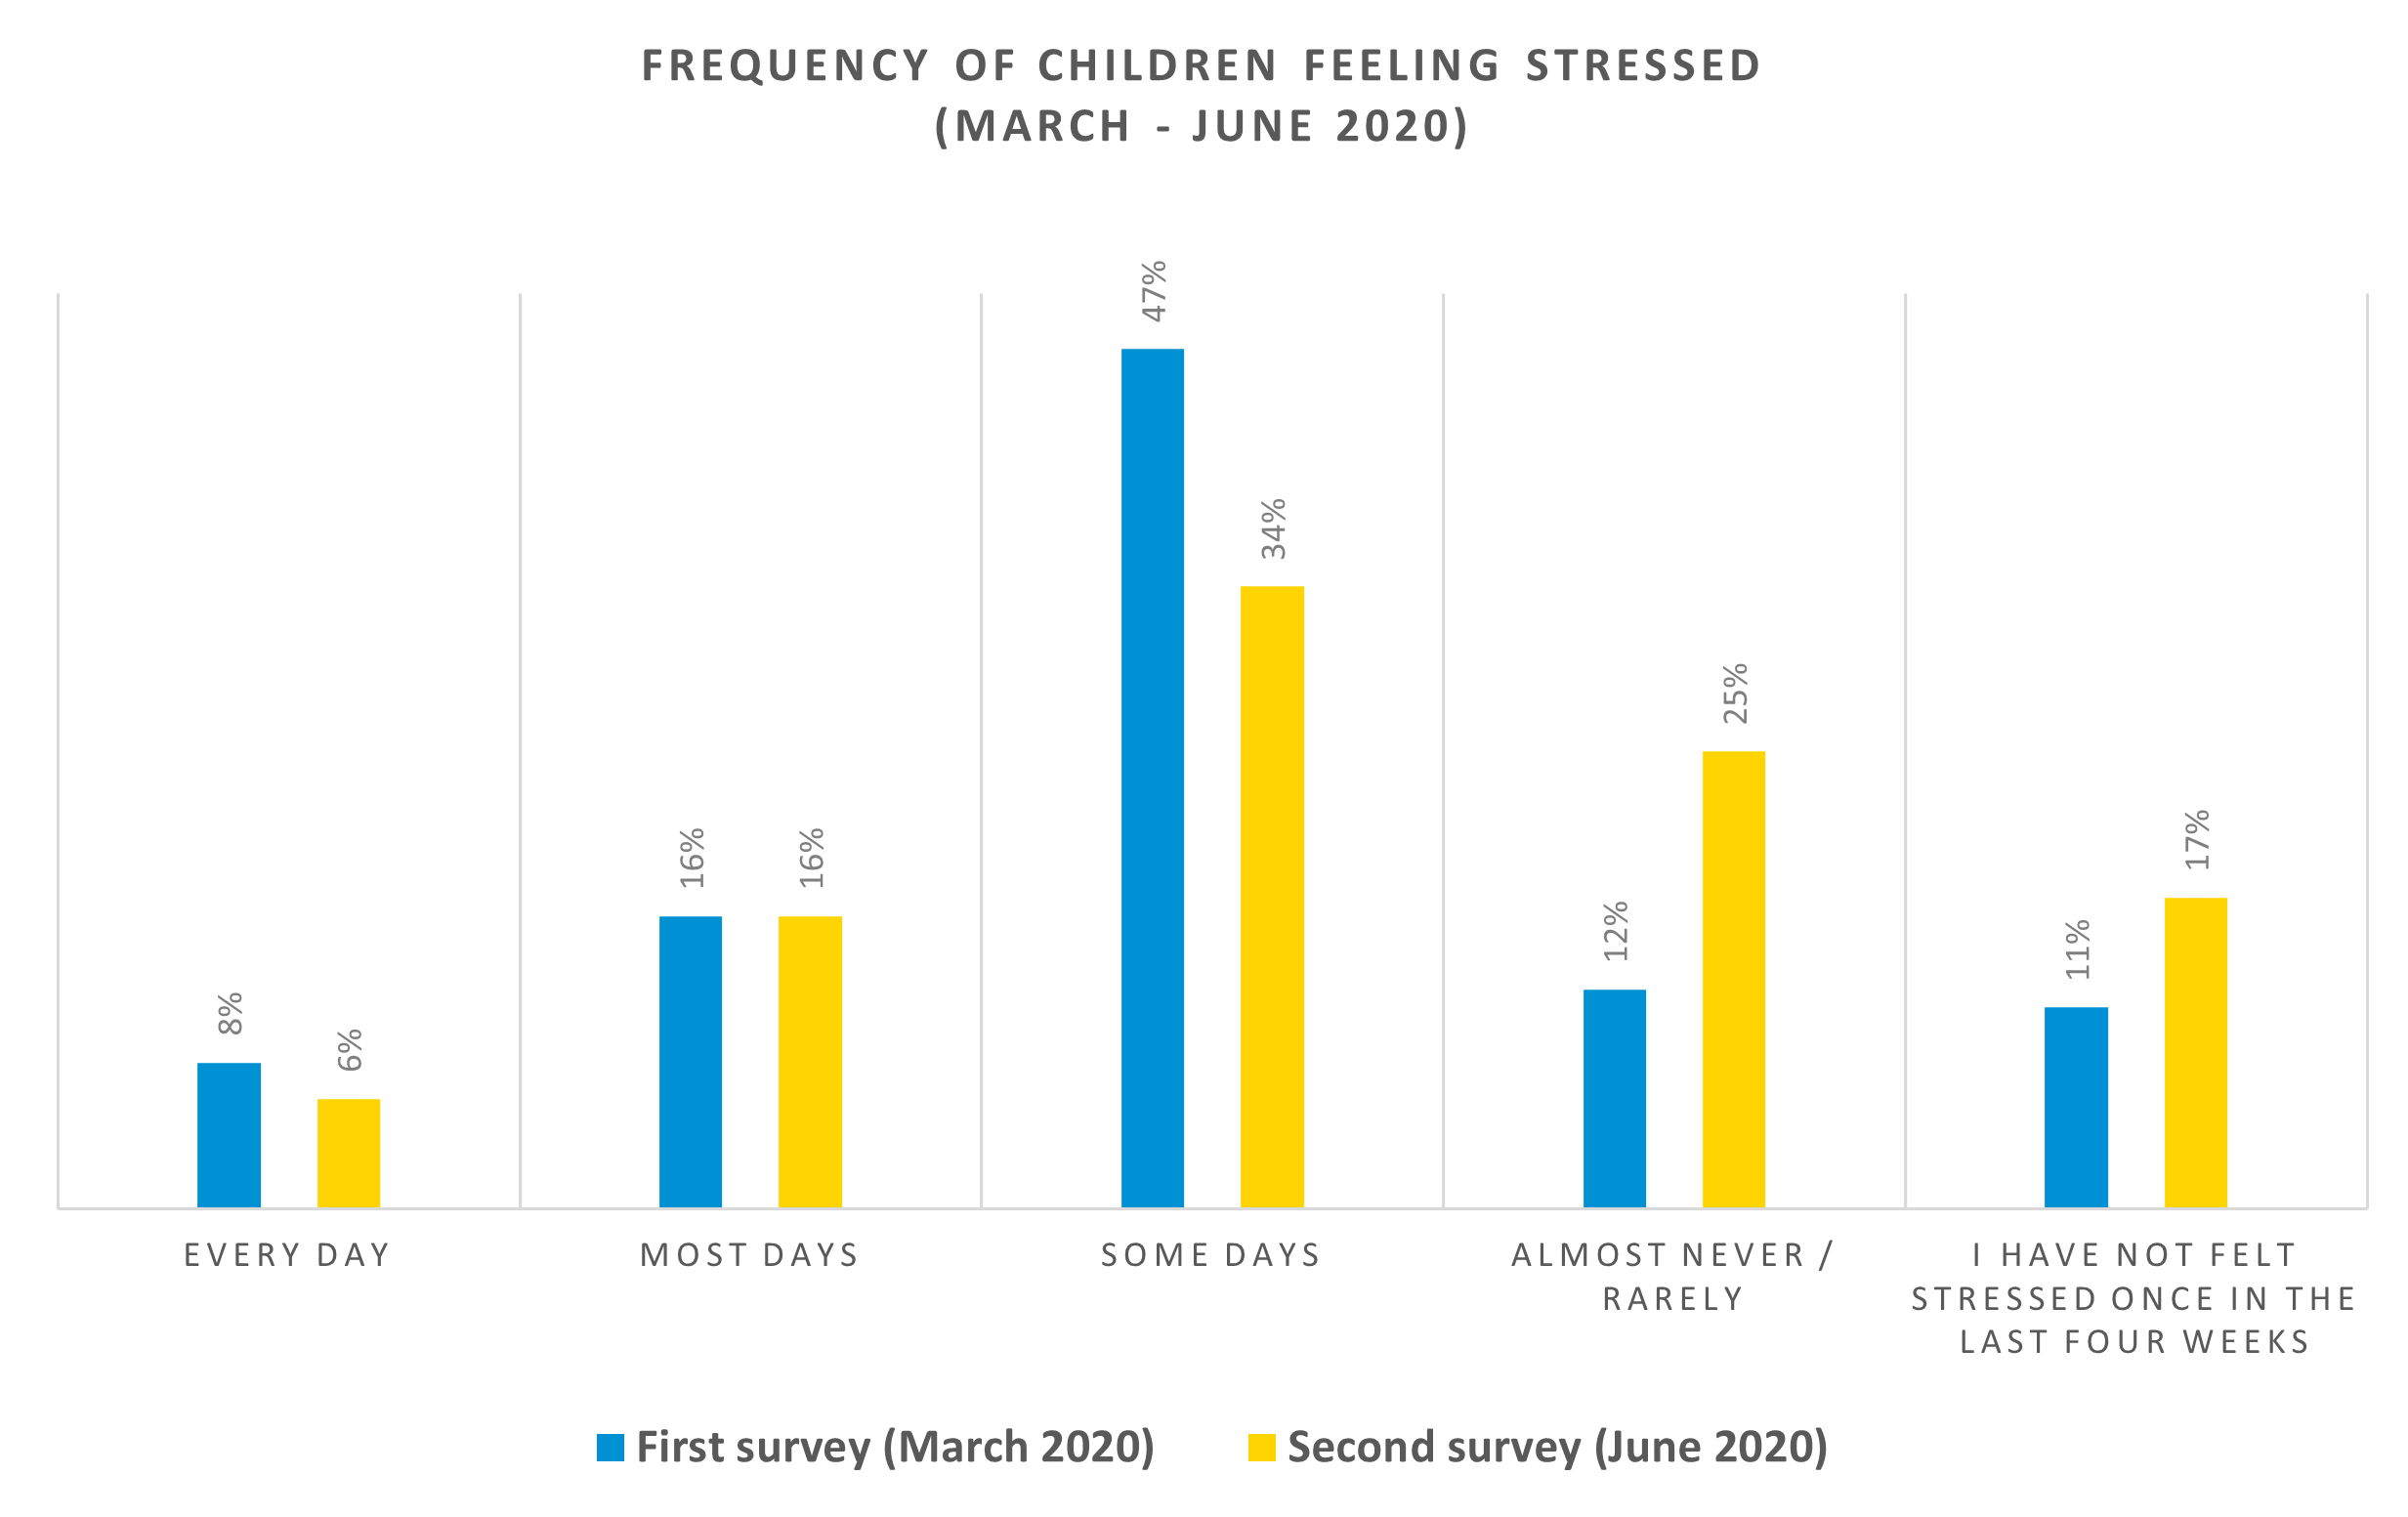 Chart showing the frequency of children feeling stressed during lockdown